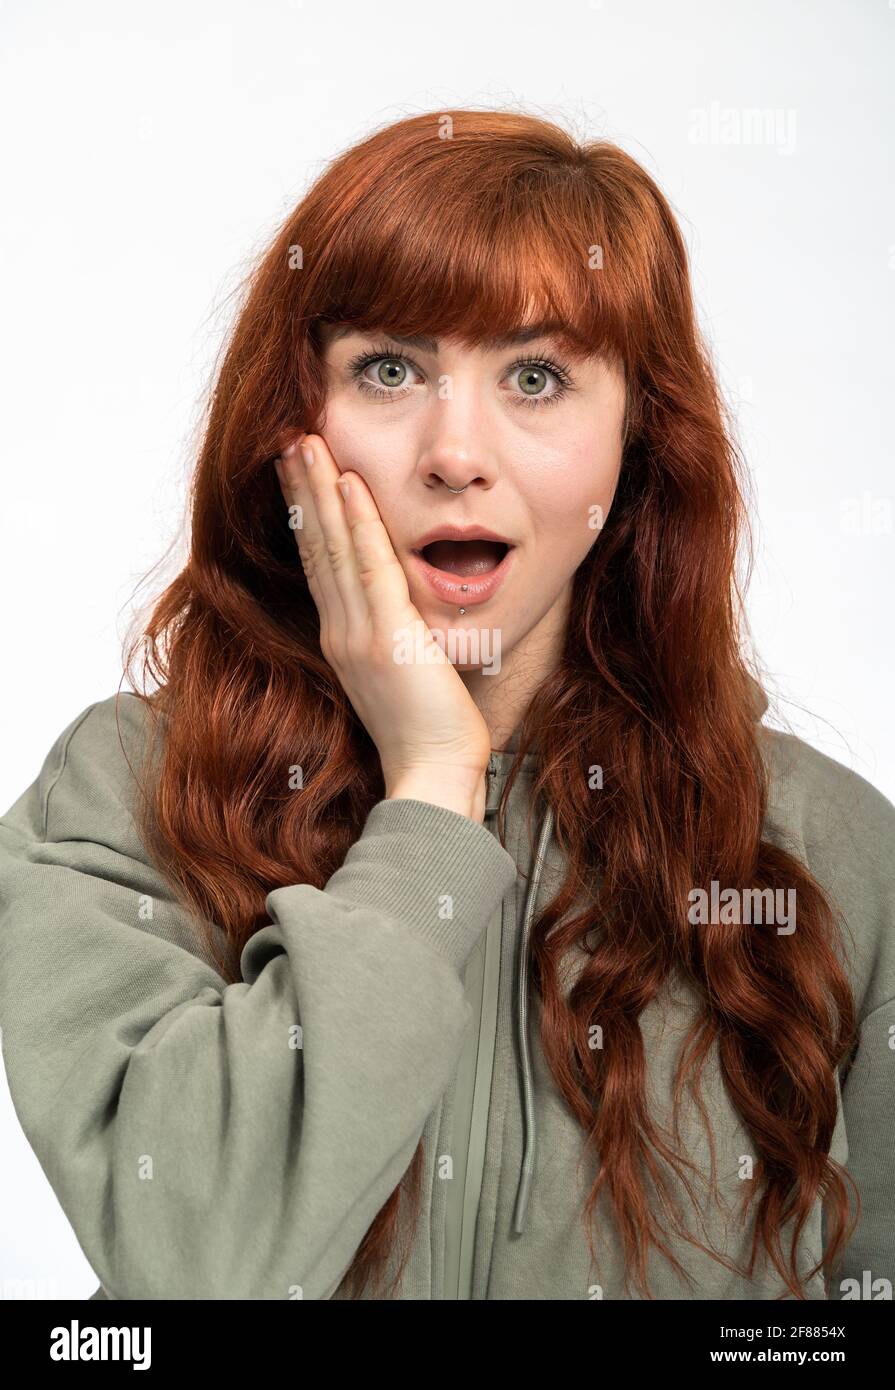 Portrait of a woman with red hair infront of white background looking surprised into camera Stock Photo